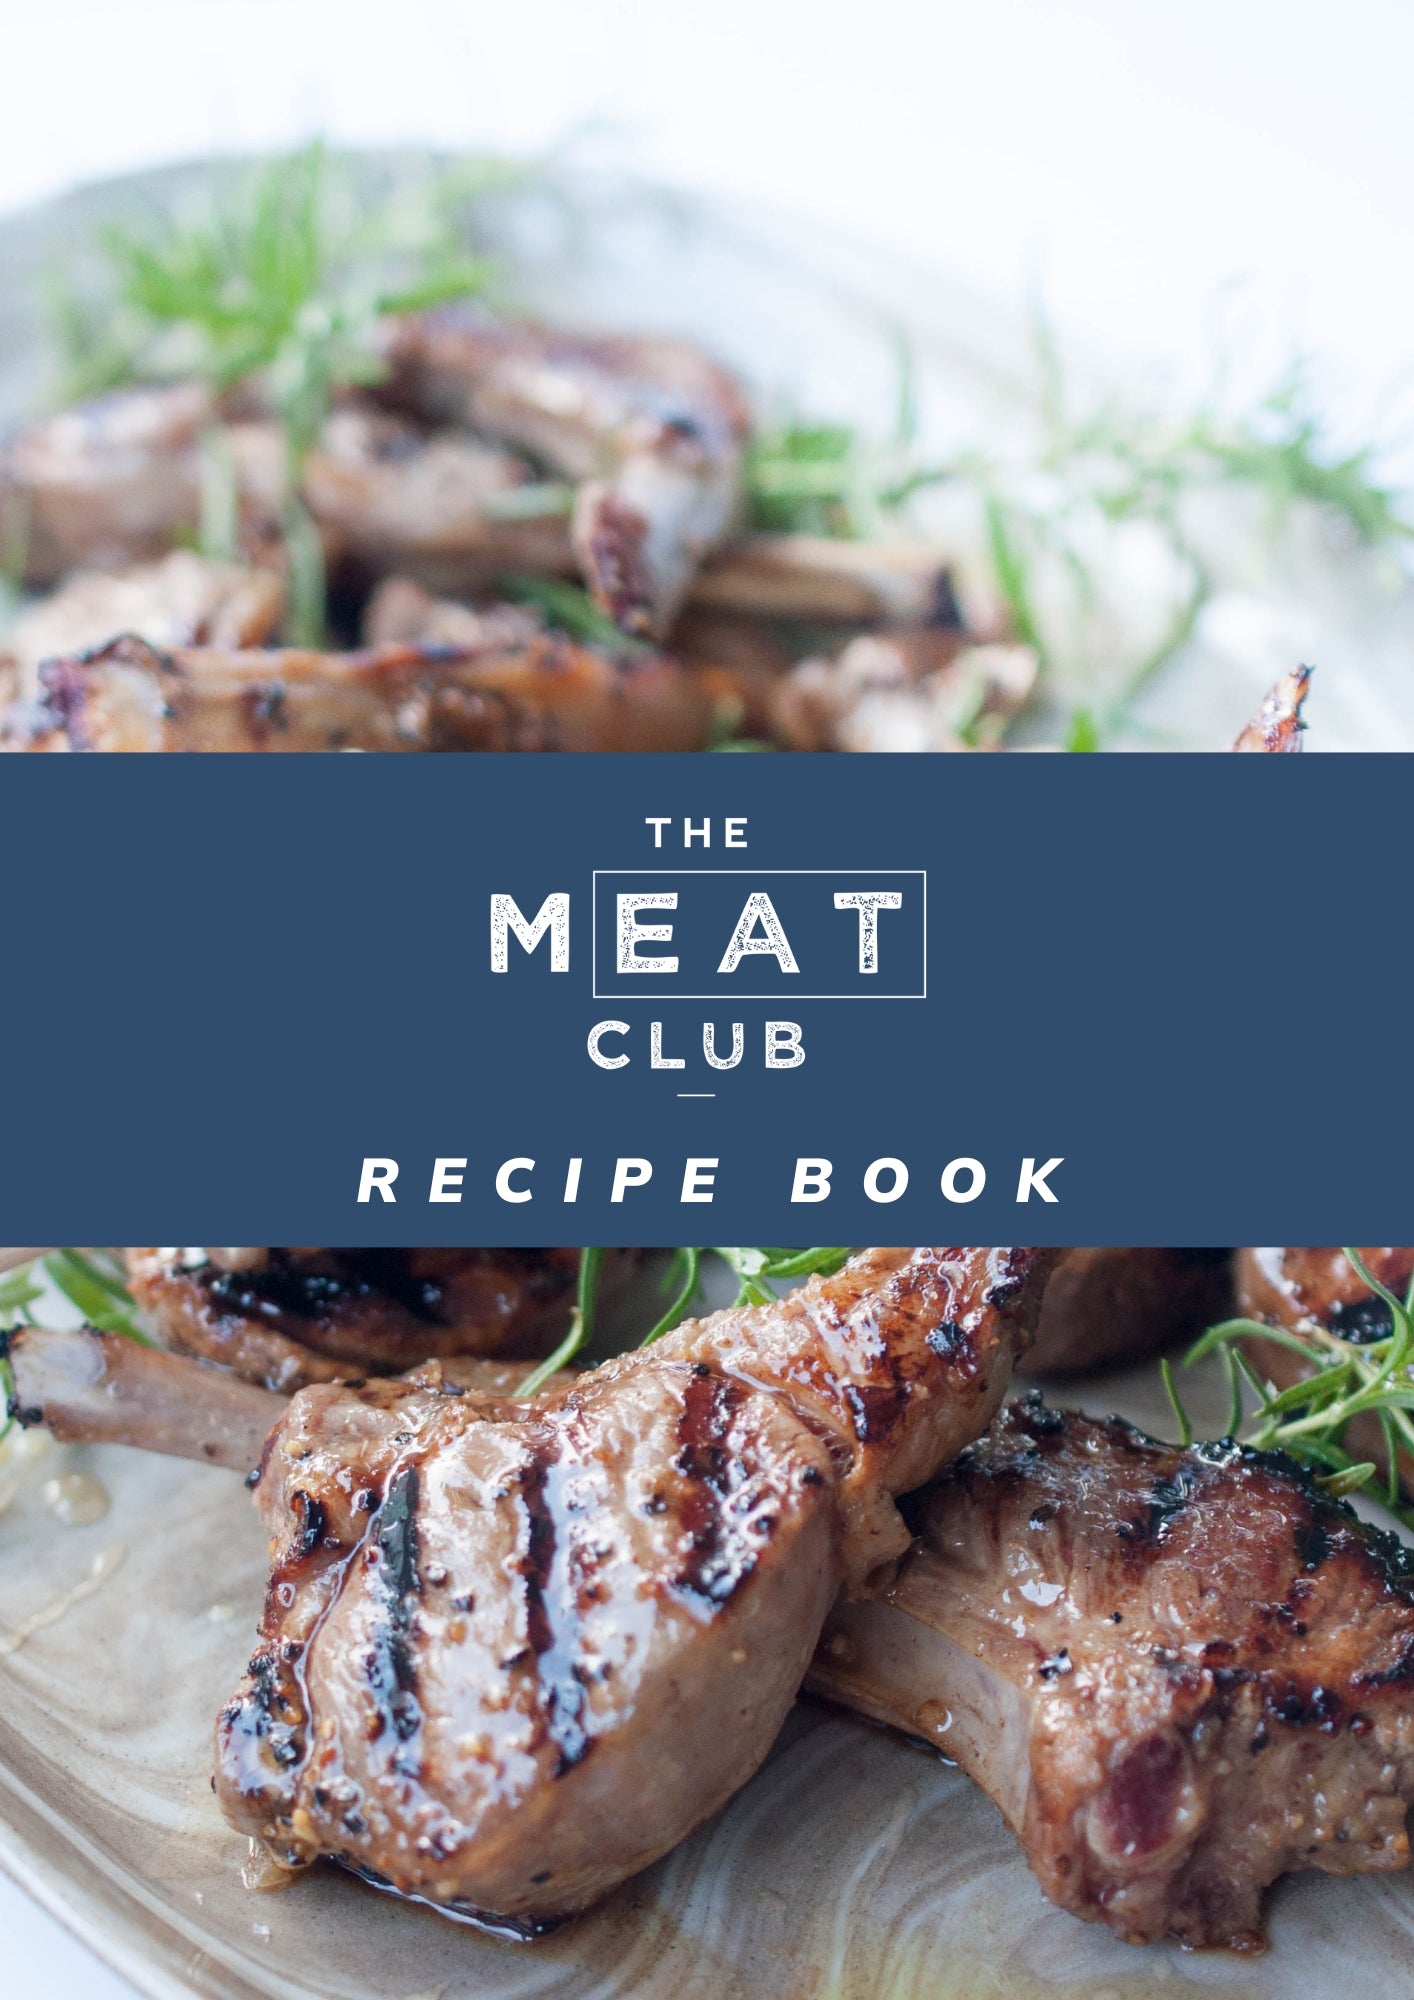 The Meat Club Recipe Book perfect ideas for every family from The Meat Club